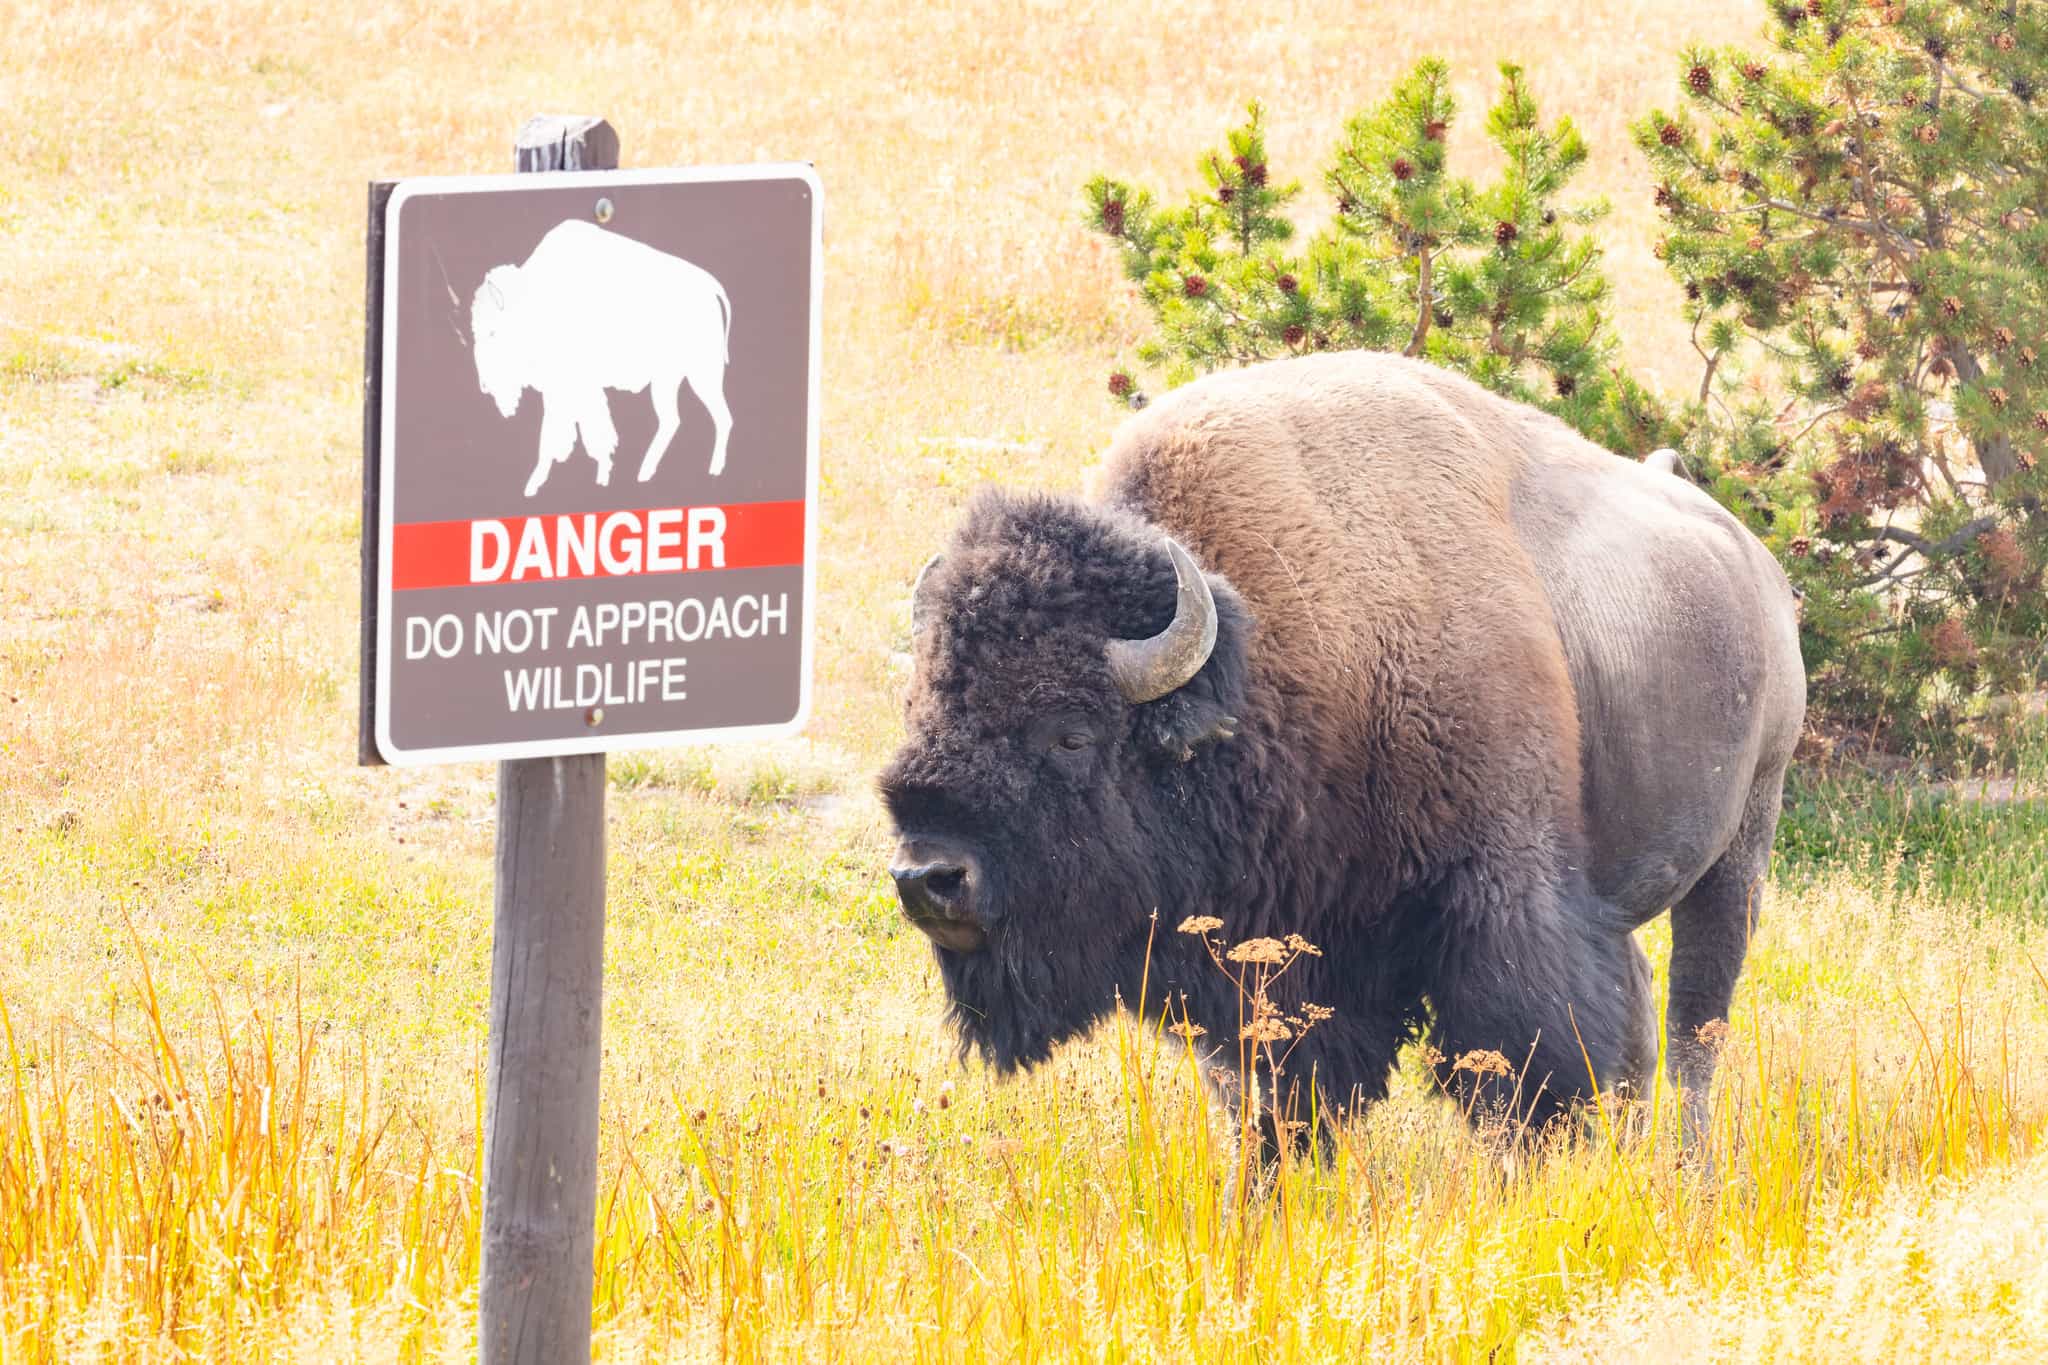 bison and danger sign in yellowstone national park